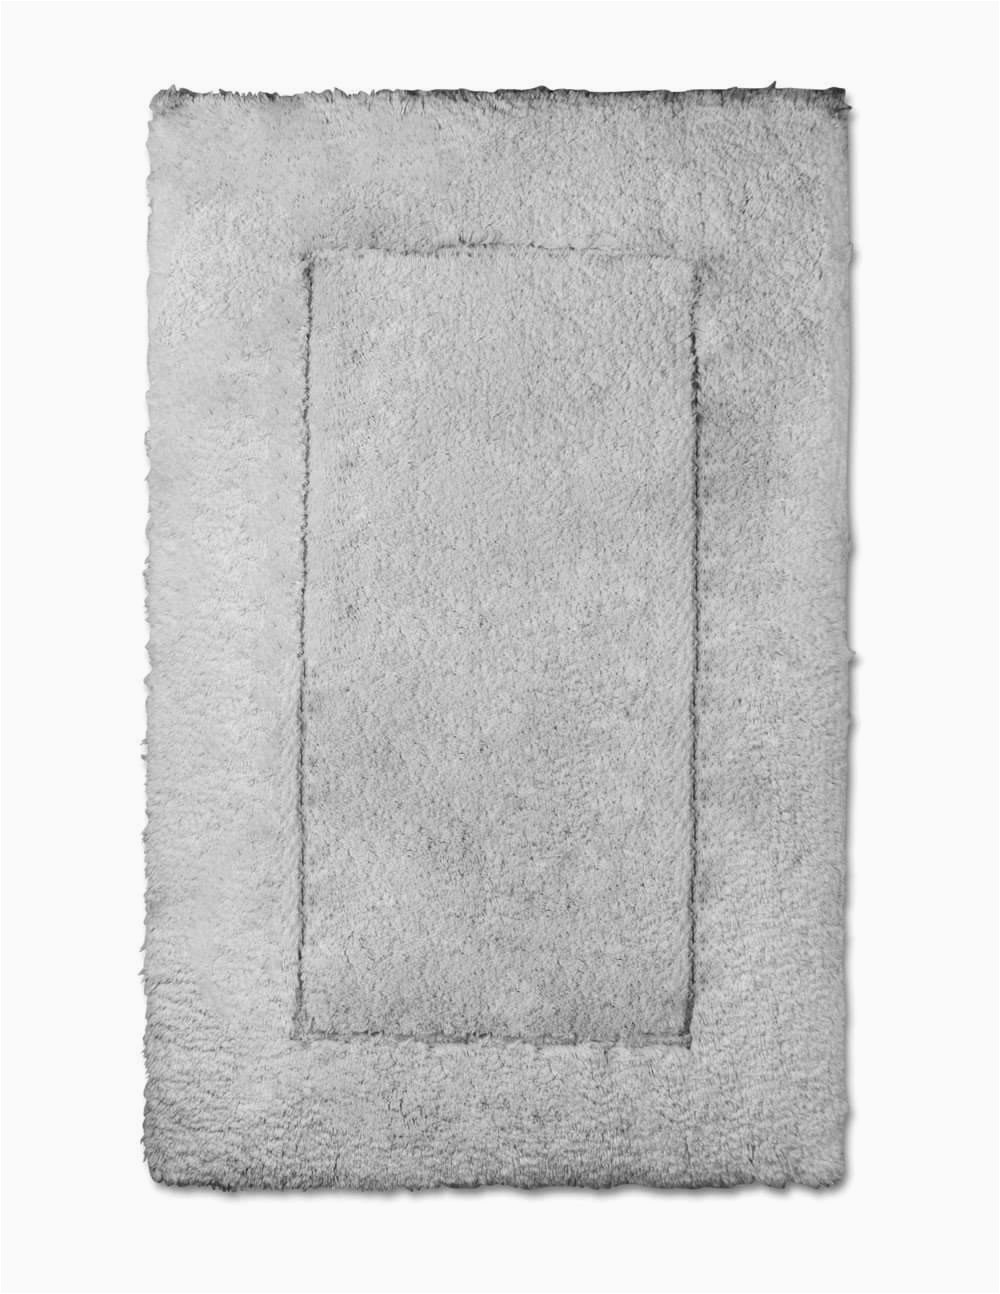 Cotton Bath Rugs with Latex Backing Eclisarre Egyptian Cotton Bath Rugs Walmart